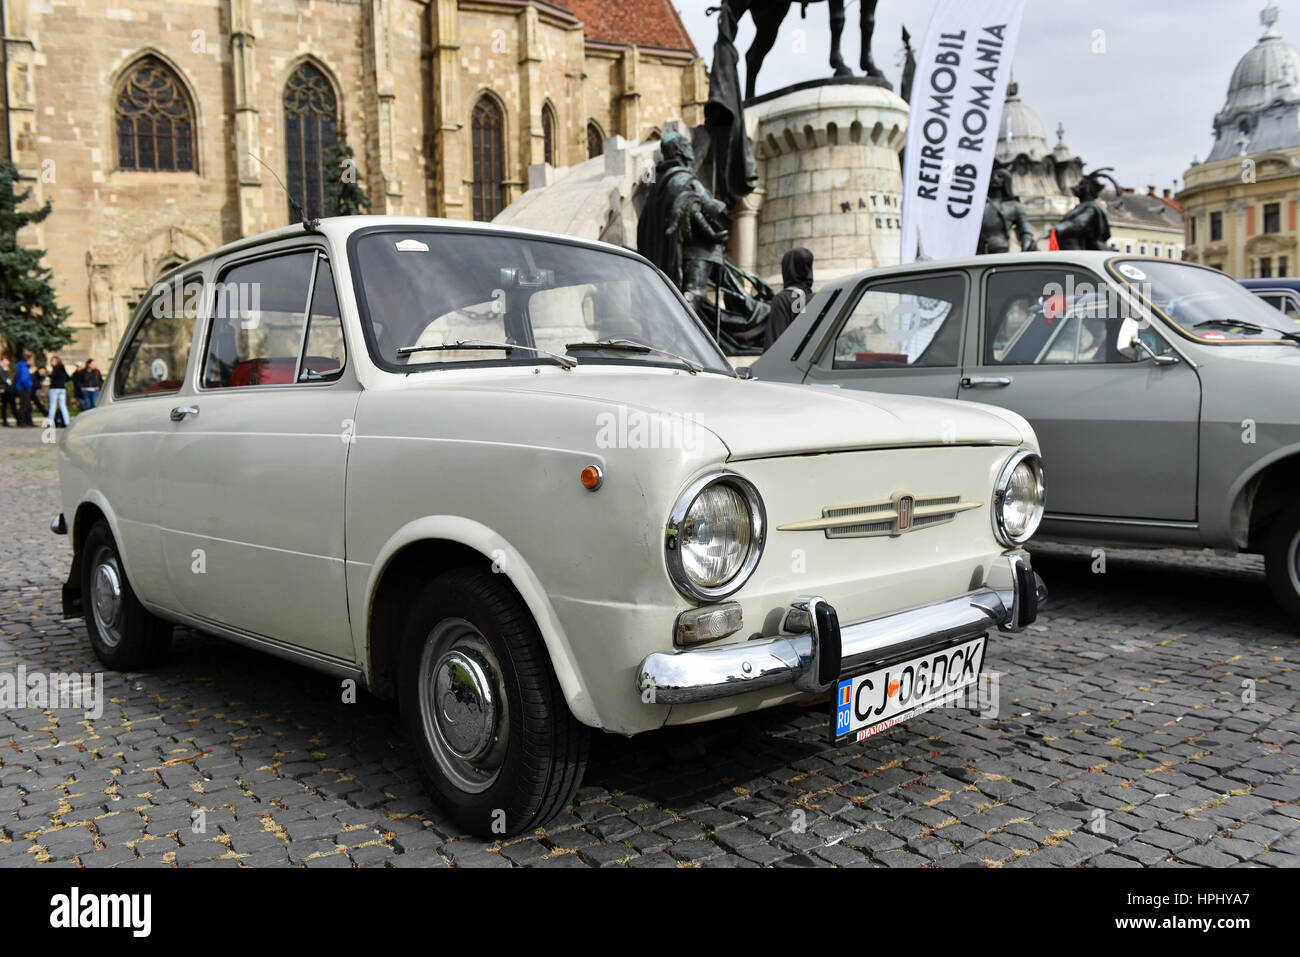 CLUJ-NAPOCA, ROMANIA - OCTOBER 15, 2016: Fiat 850 car from Italy and other vintage cars exhibited during the Retro Mobile Autumn Parade in the city of Stock Photo